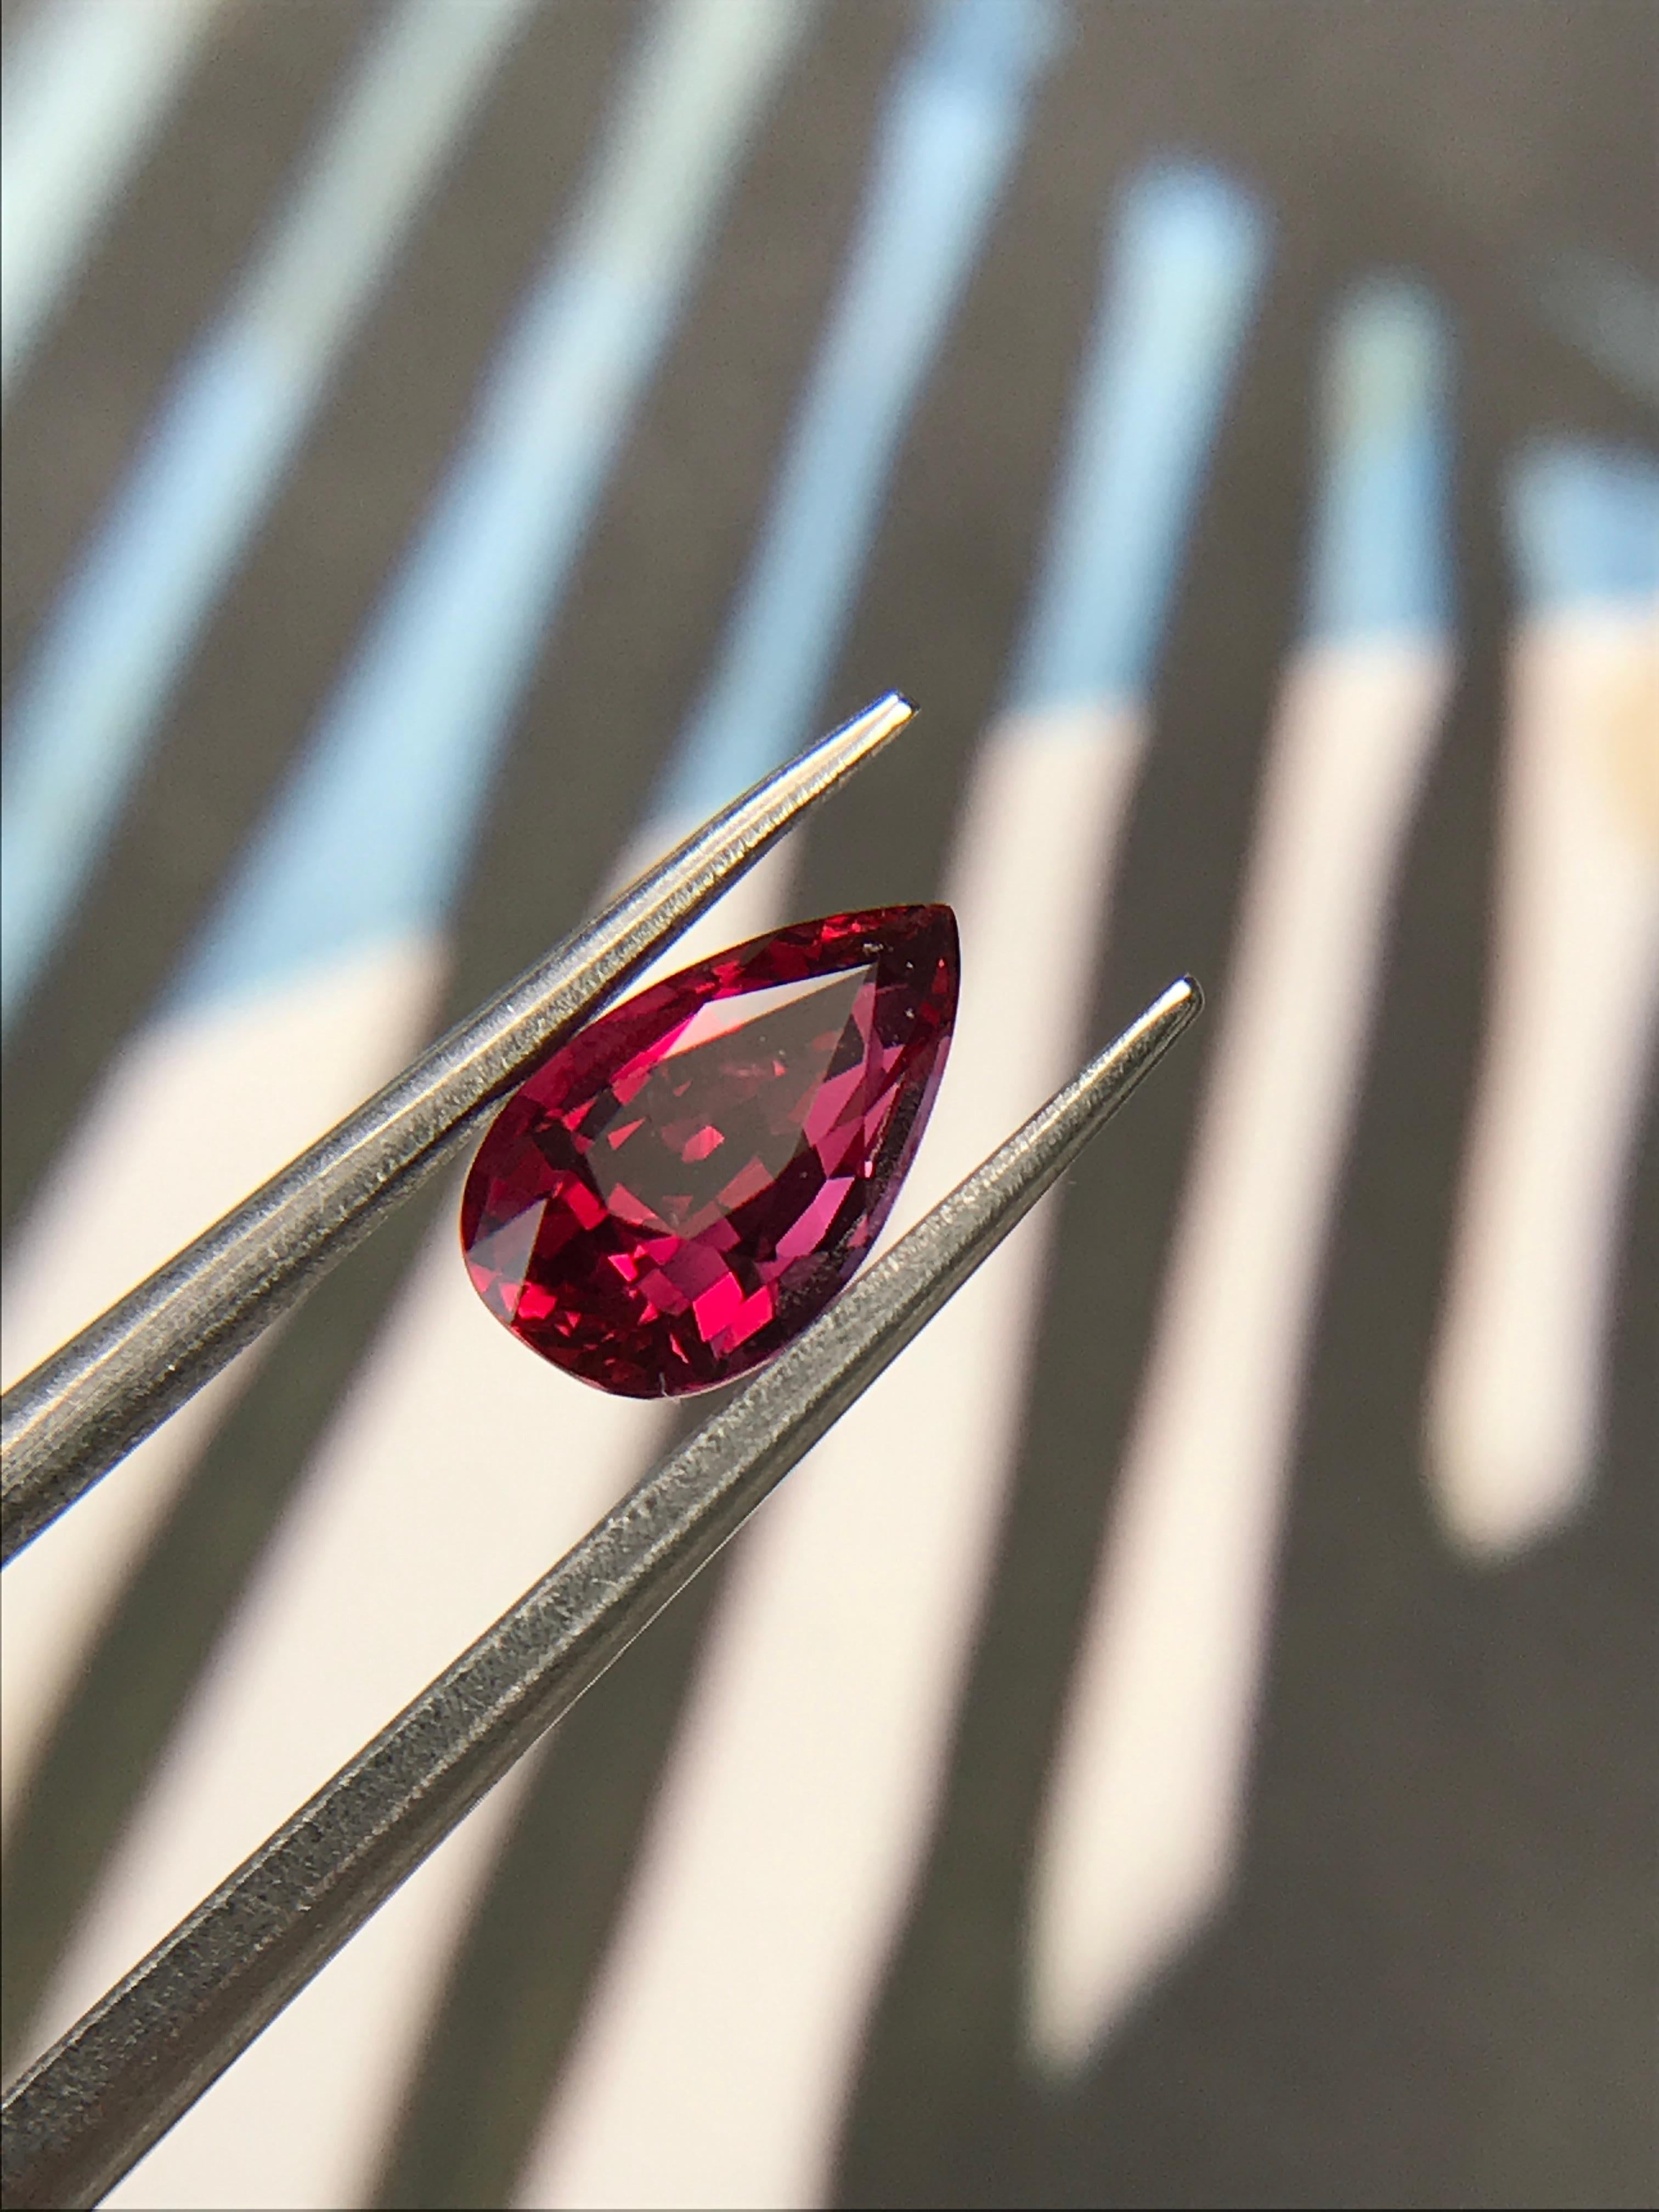 Beautiful 1.01 carat natural pear-shaped ruby in a vivid purplish-red colour. This ruby would make a unique piece of jewellery.

We specialise in colour gemstones and offer a bespoke jewellery service. The production time for bespoke pieces is